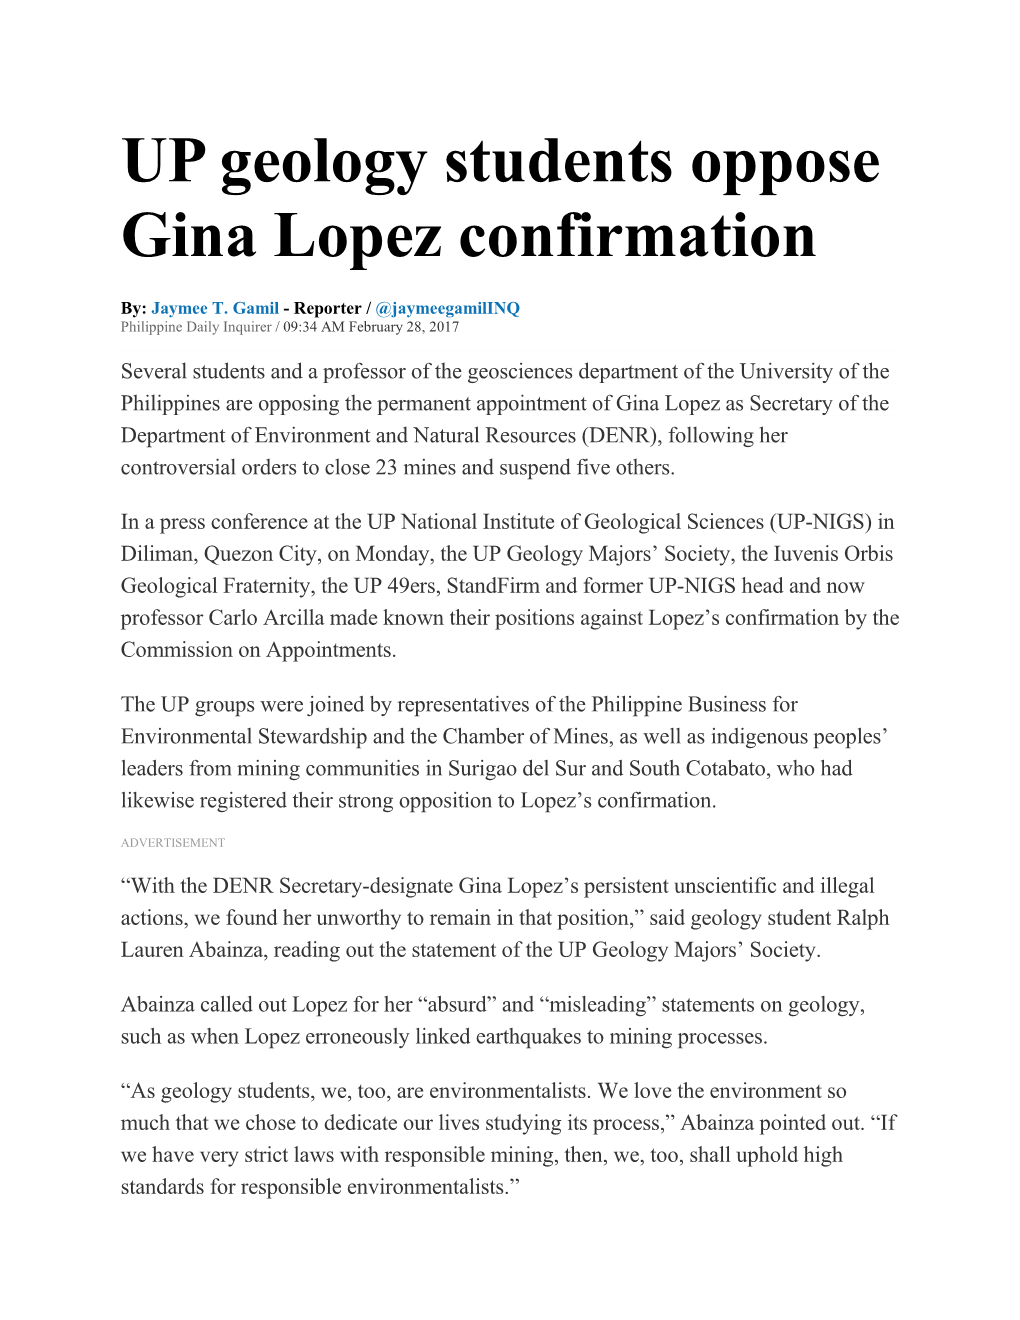 UP Geology Students Oppose Gina Lopez Confirmation